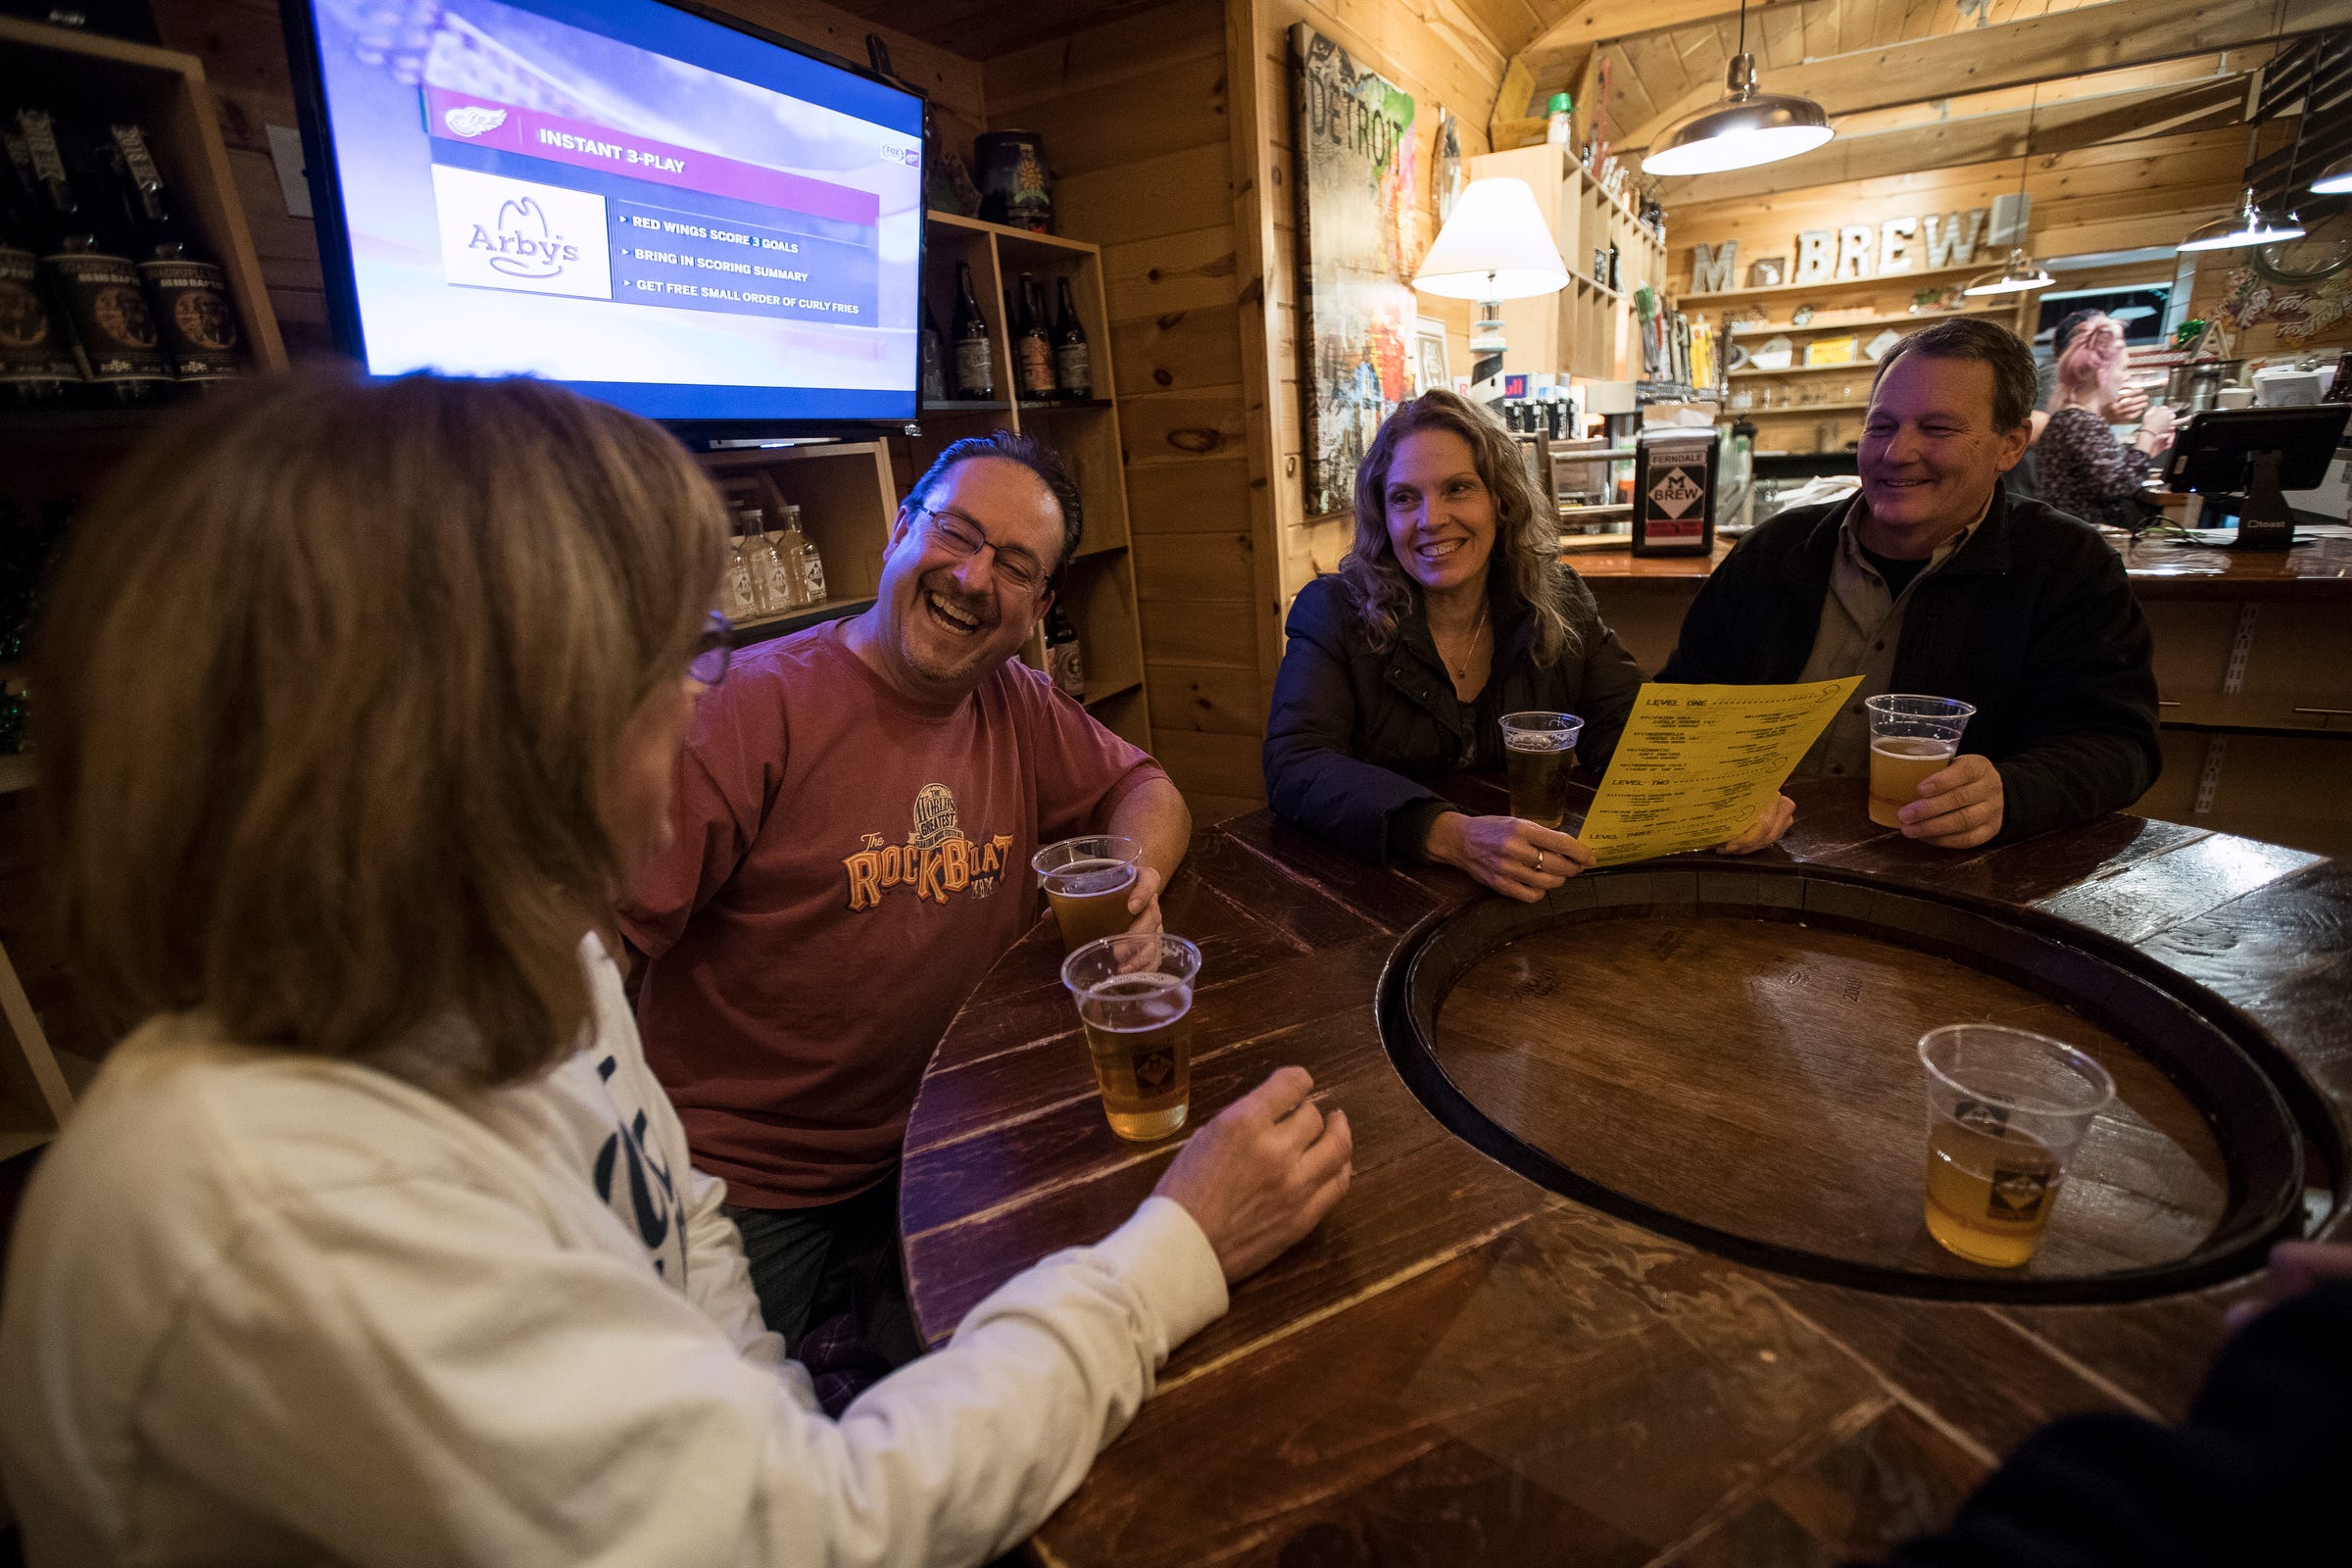 From left, Debbie McGraw, Ed Jankowski, both of Downriver share a laughter with Lori and Dave Stoddart, both of Trenton, as they enjoy a drink at M-Brew in Ferndale, Thursday, March 7, 2019.